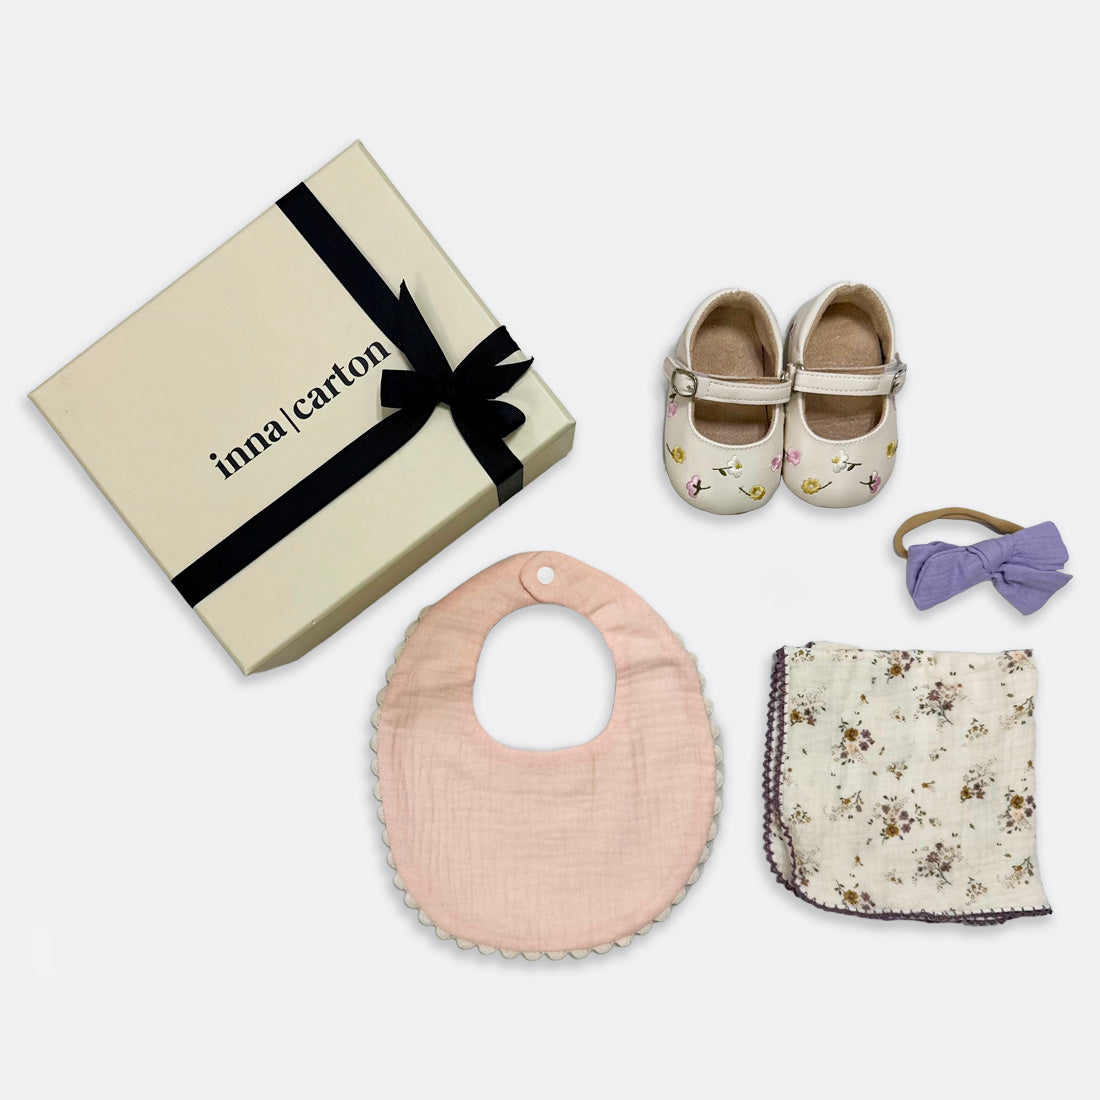 Mary Jane Embroidered Shoes (6-12 months) Scallop Bib | Pink Baby Headband | Lavender Cottage Chic Muslin Square, shop the best Christmas gift gifts for her for him from Inna carton online store dubai, UAE!